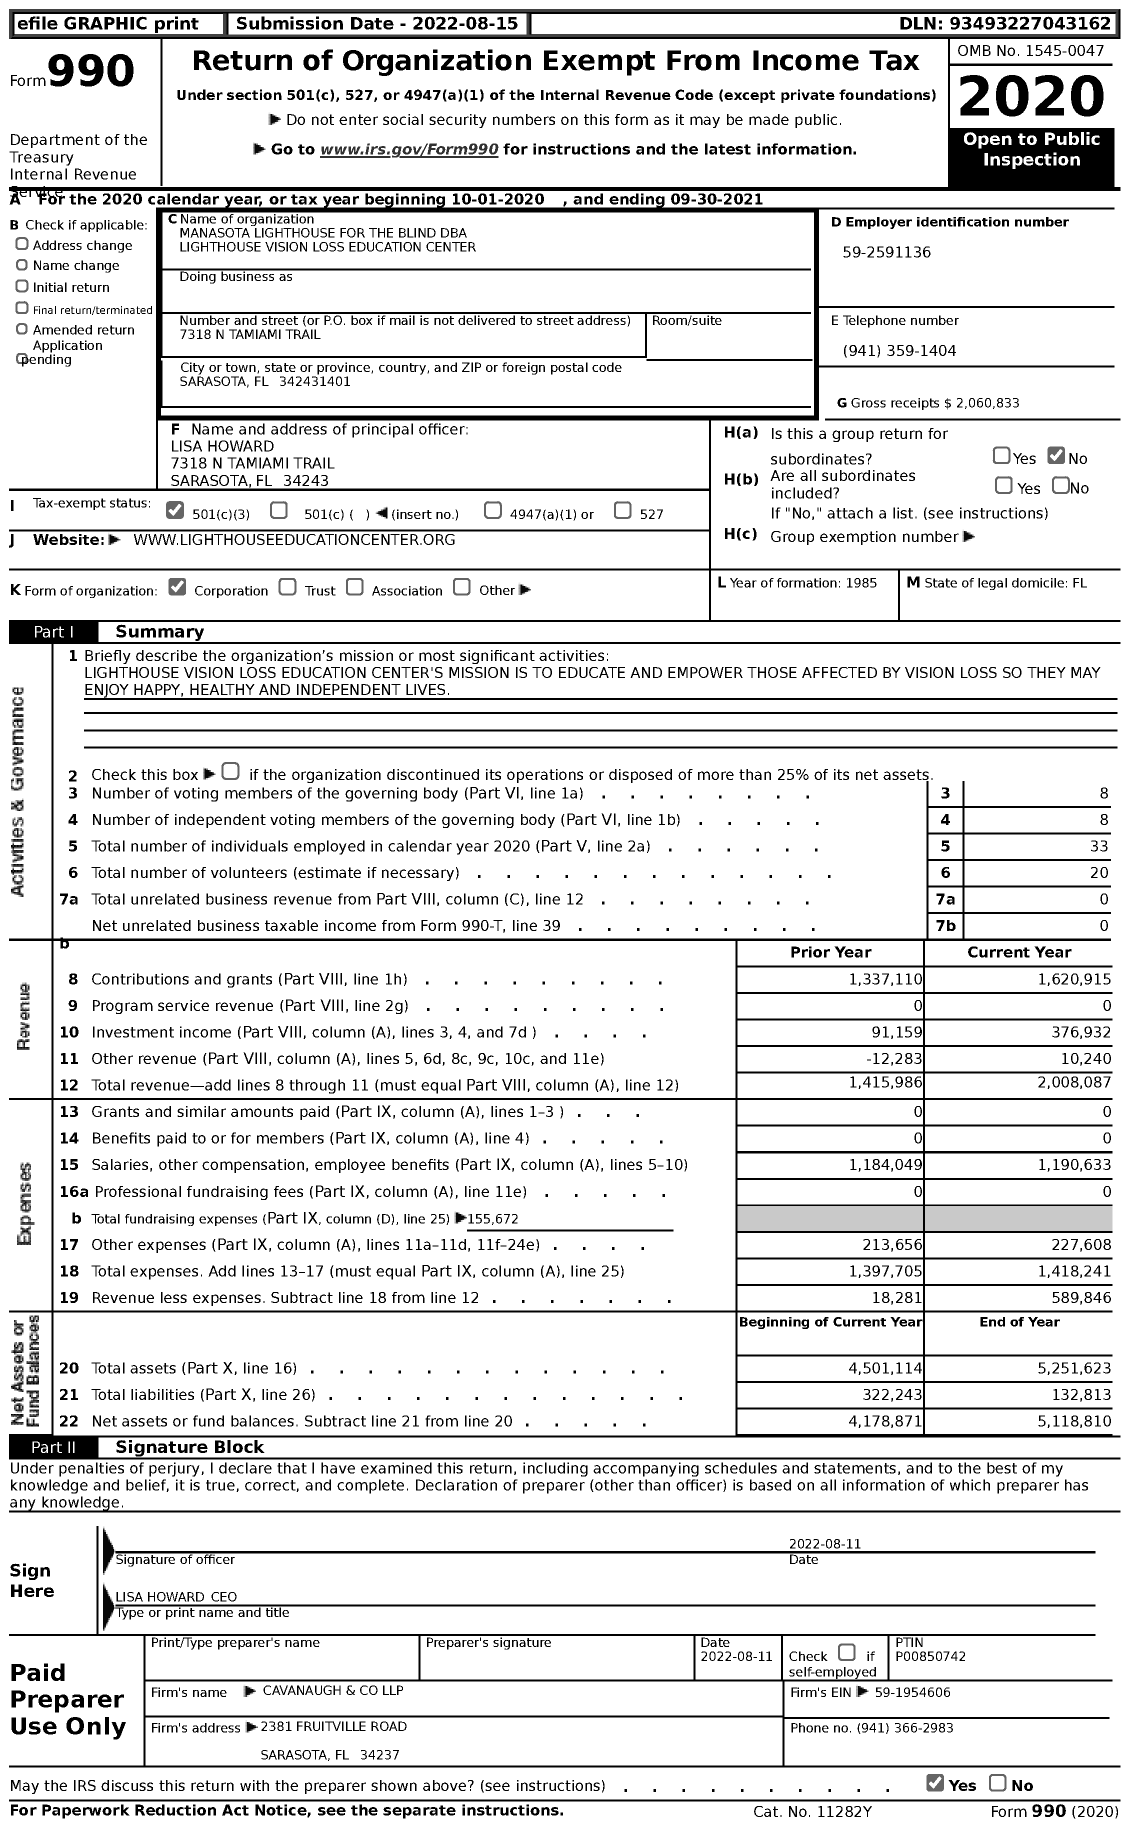 Image of first page of 2020 Form 990 for Lighthouse Vision Loss Education Center